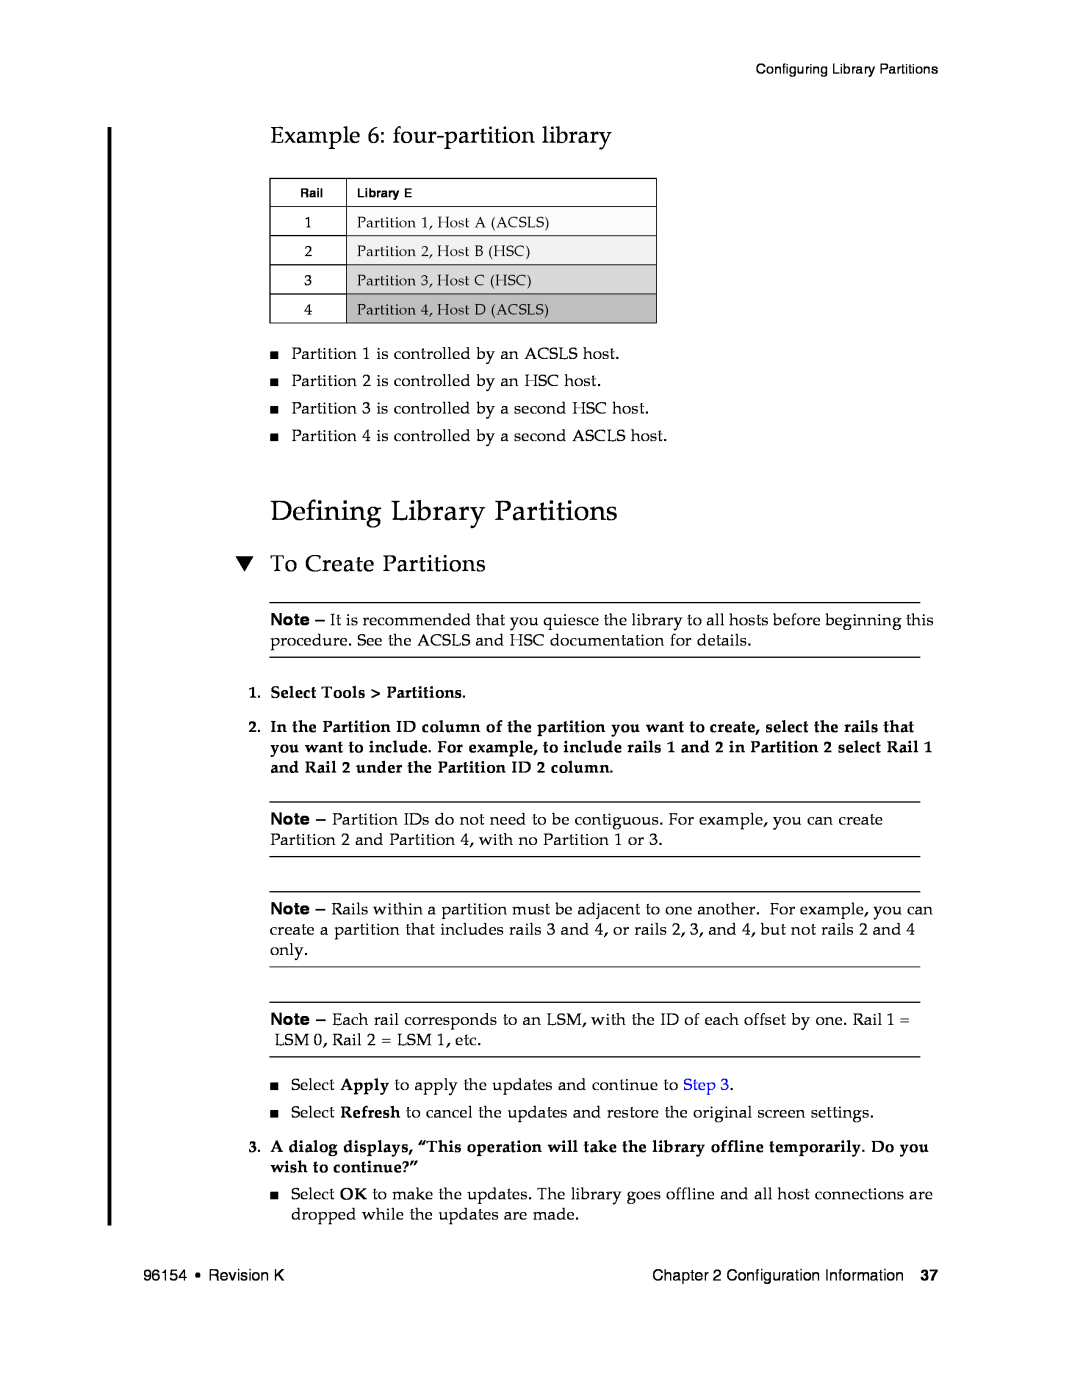 Sun Microsystems SL8500 manual Defining Library Partitions, Example 6 four-partition library, To Create Partitions 